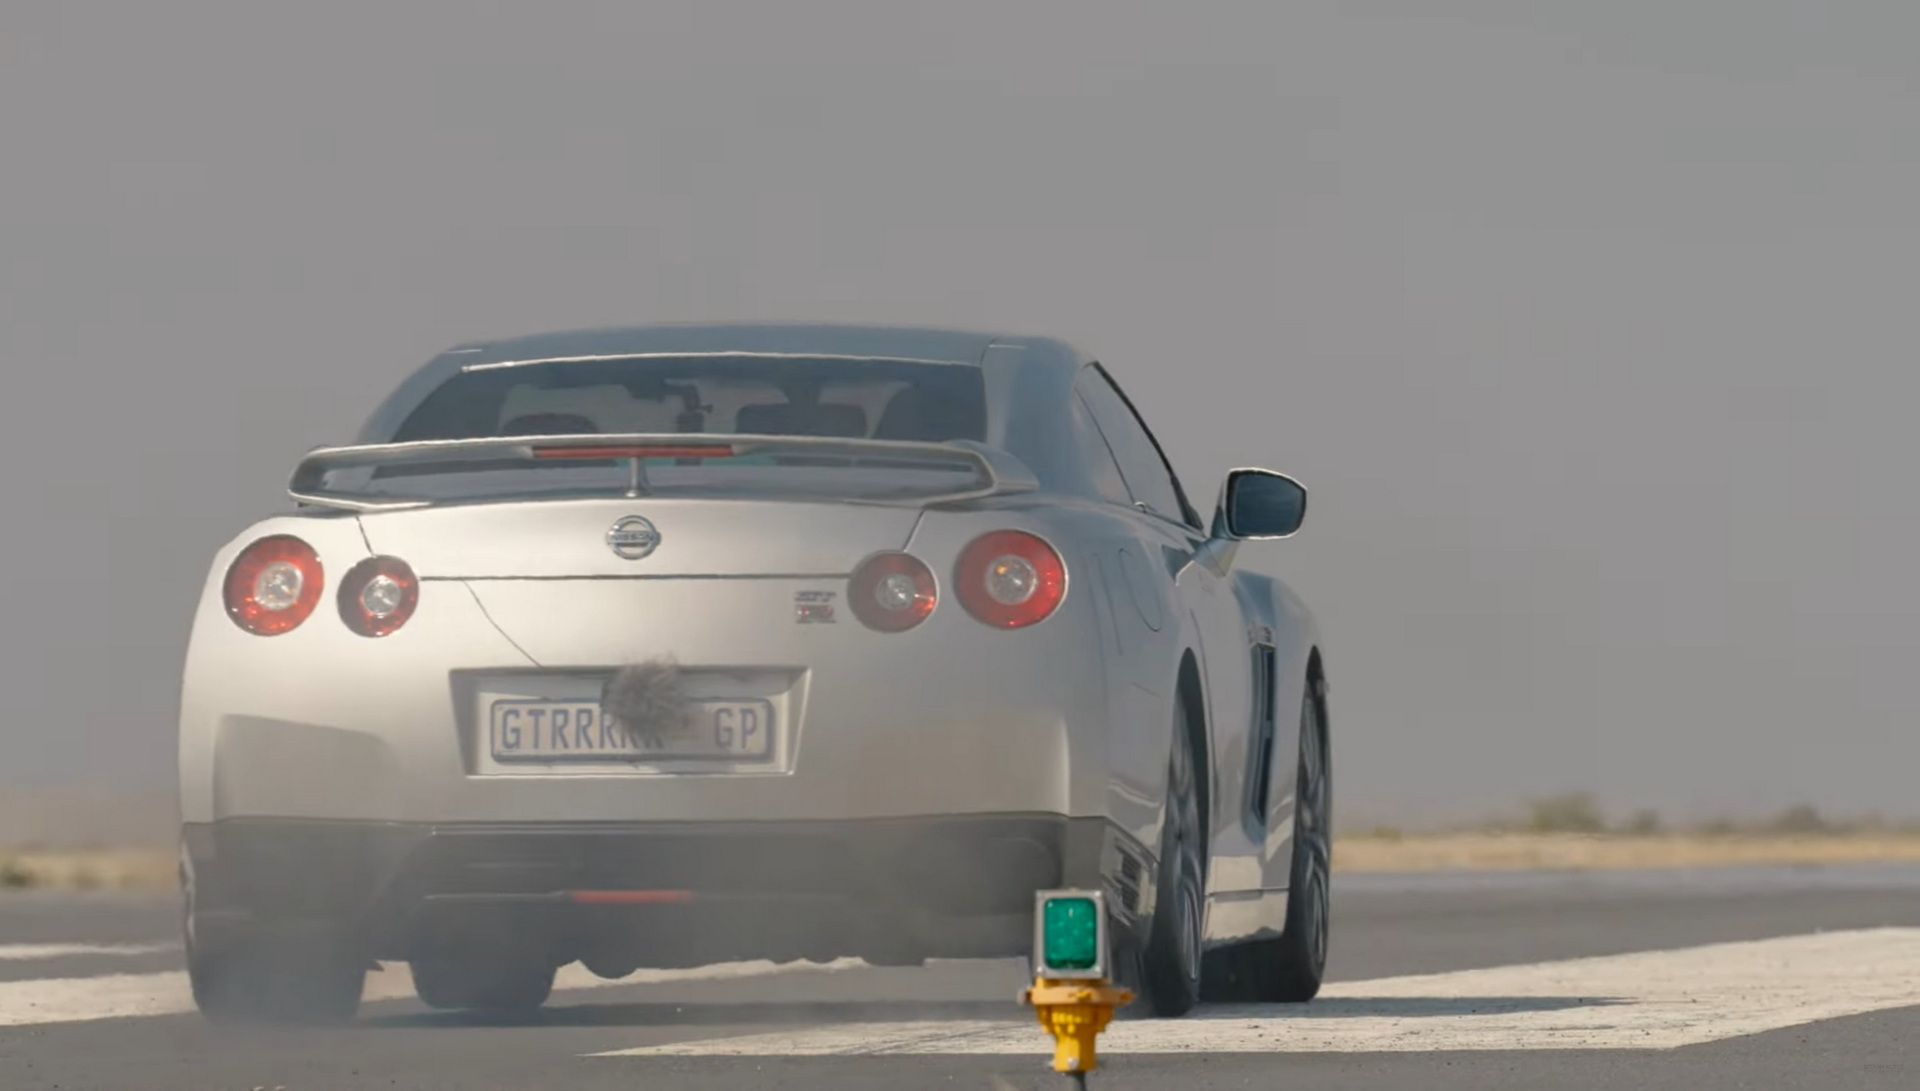 Turn down for what#car #gtr #fyp #virus #modified